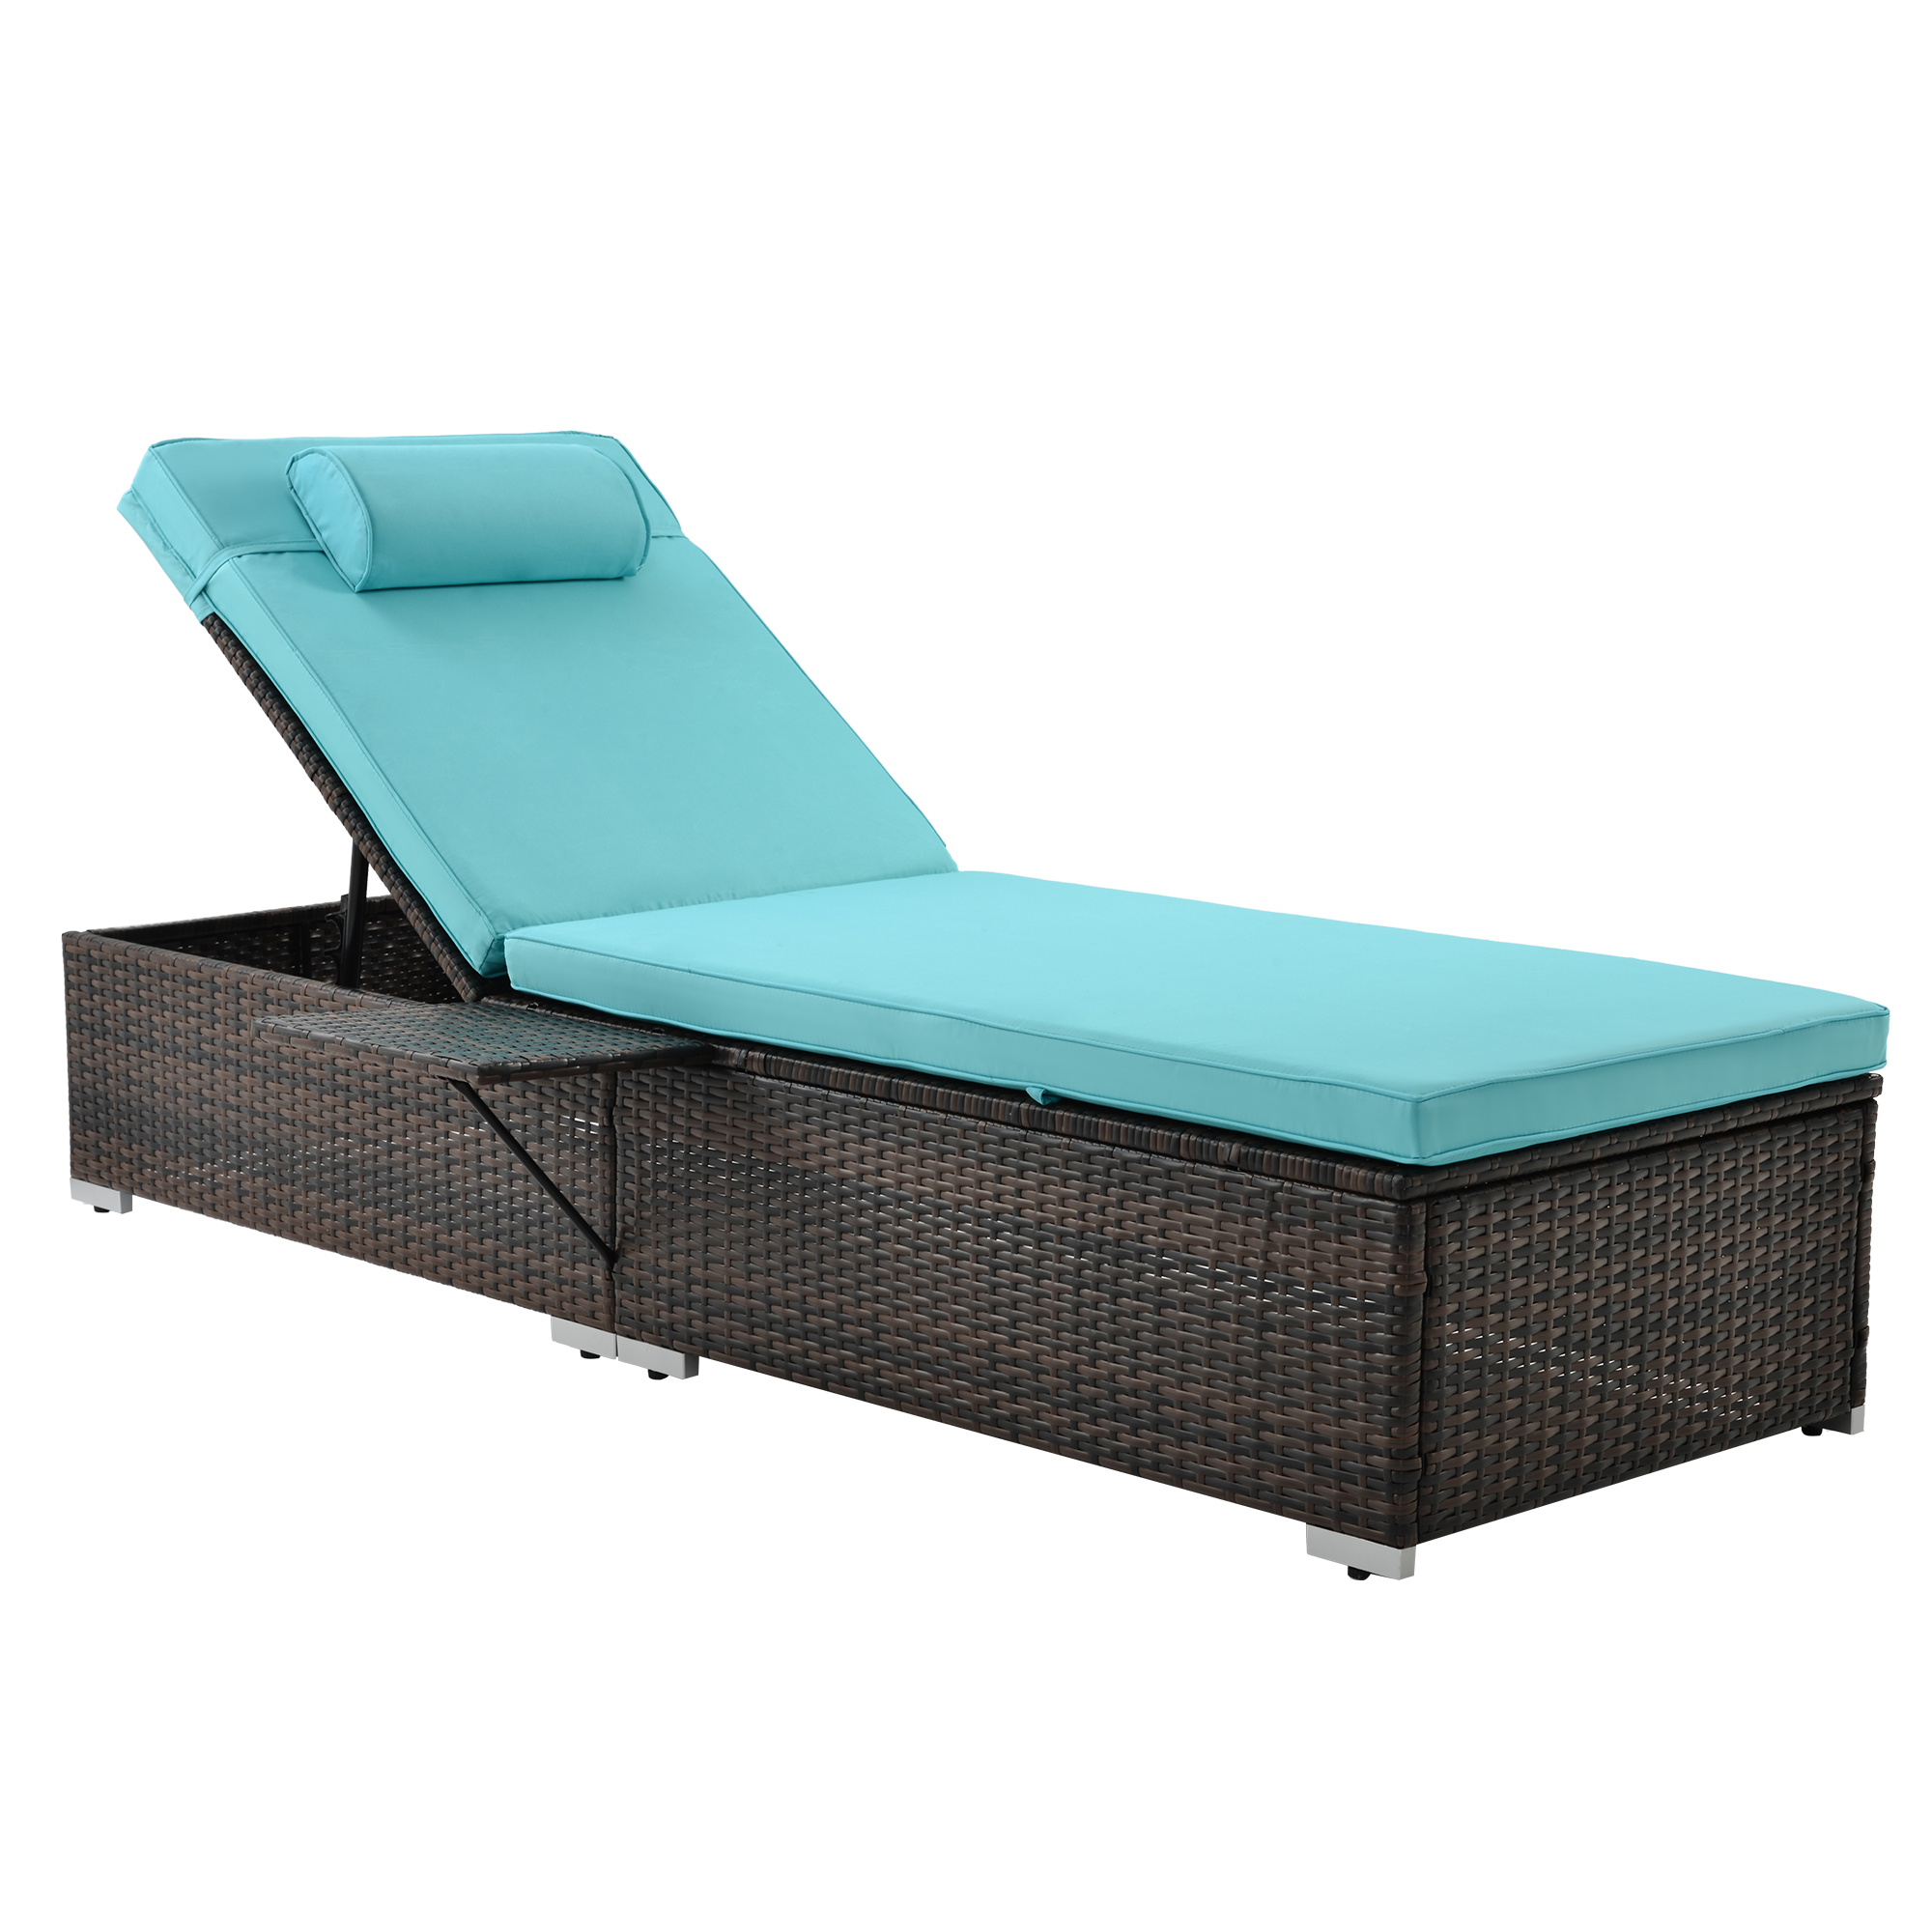 Sportaza SAME AS W213S00075: Outdoor PE Lounge - 2 Piece Patio Brown Rattan Reclining Chair Furniture Set Beach Pool Adjustable Backrest Recliners with Side Table and Comfort Head Pillow - image 3 of 7